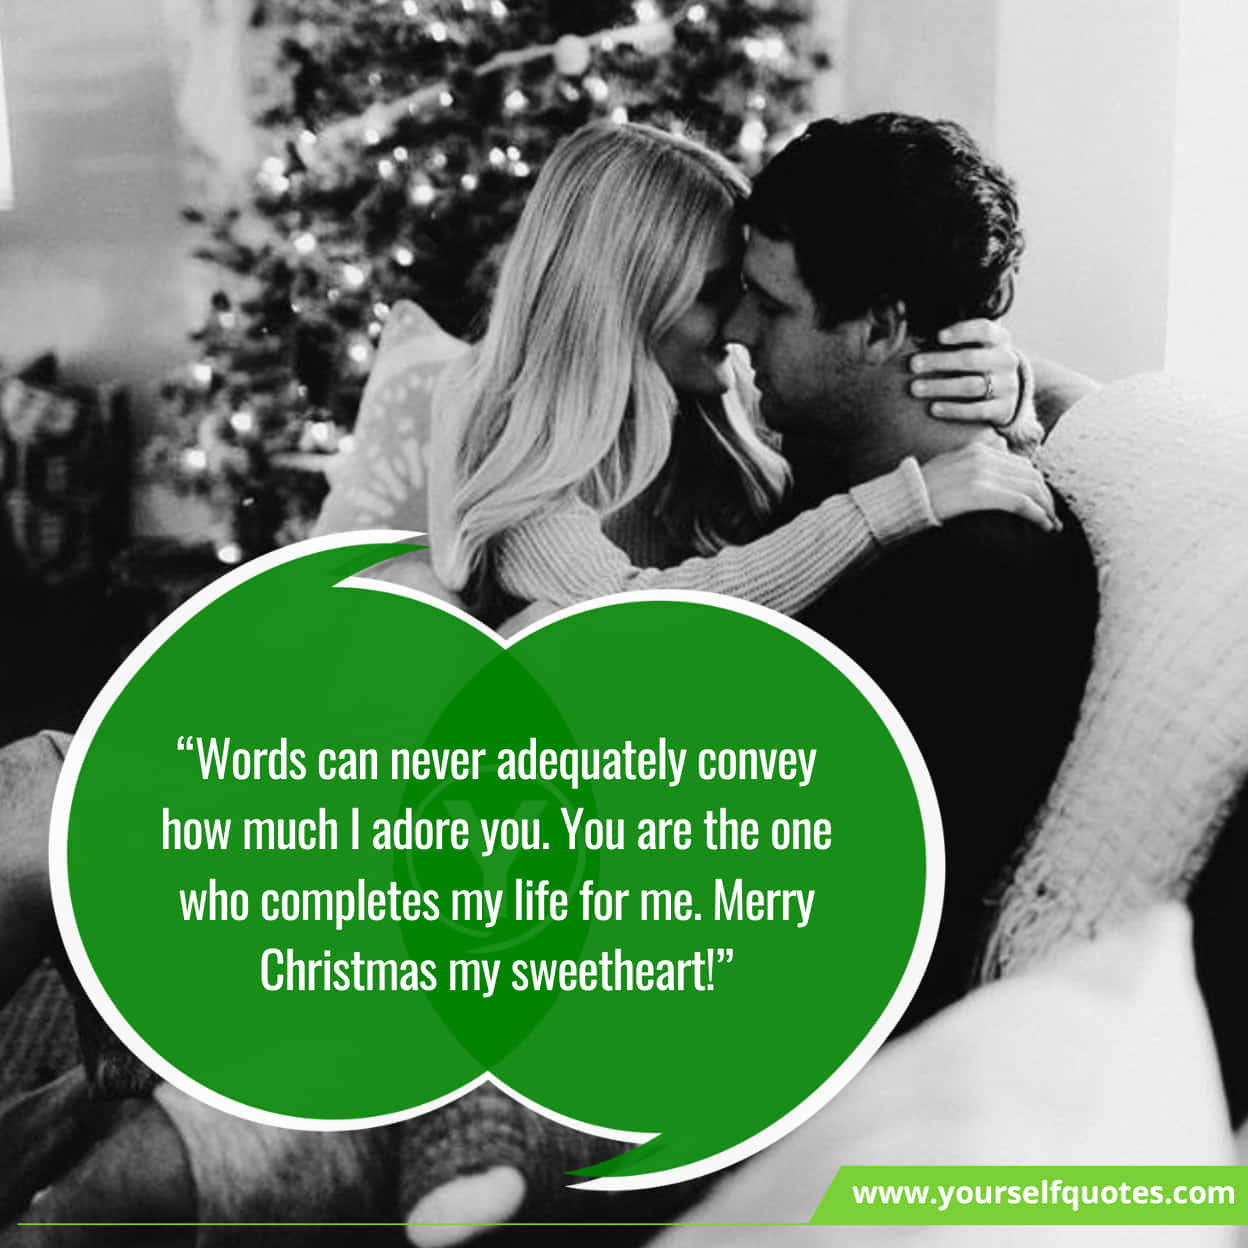 Inspiring Romantic Merry Christmas Wishes for Wife